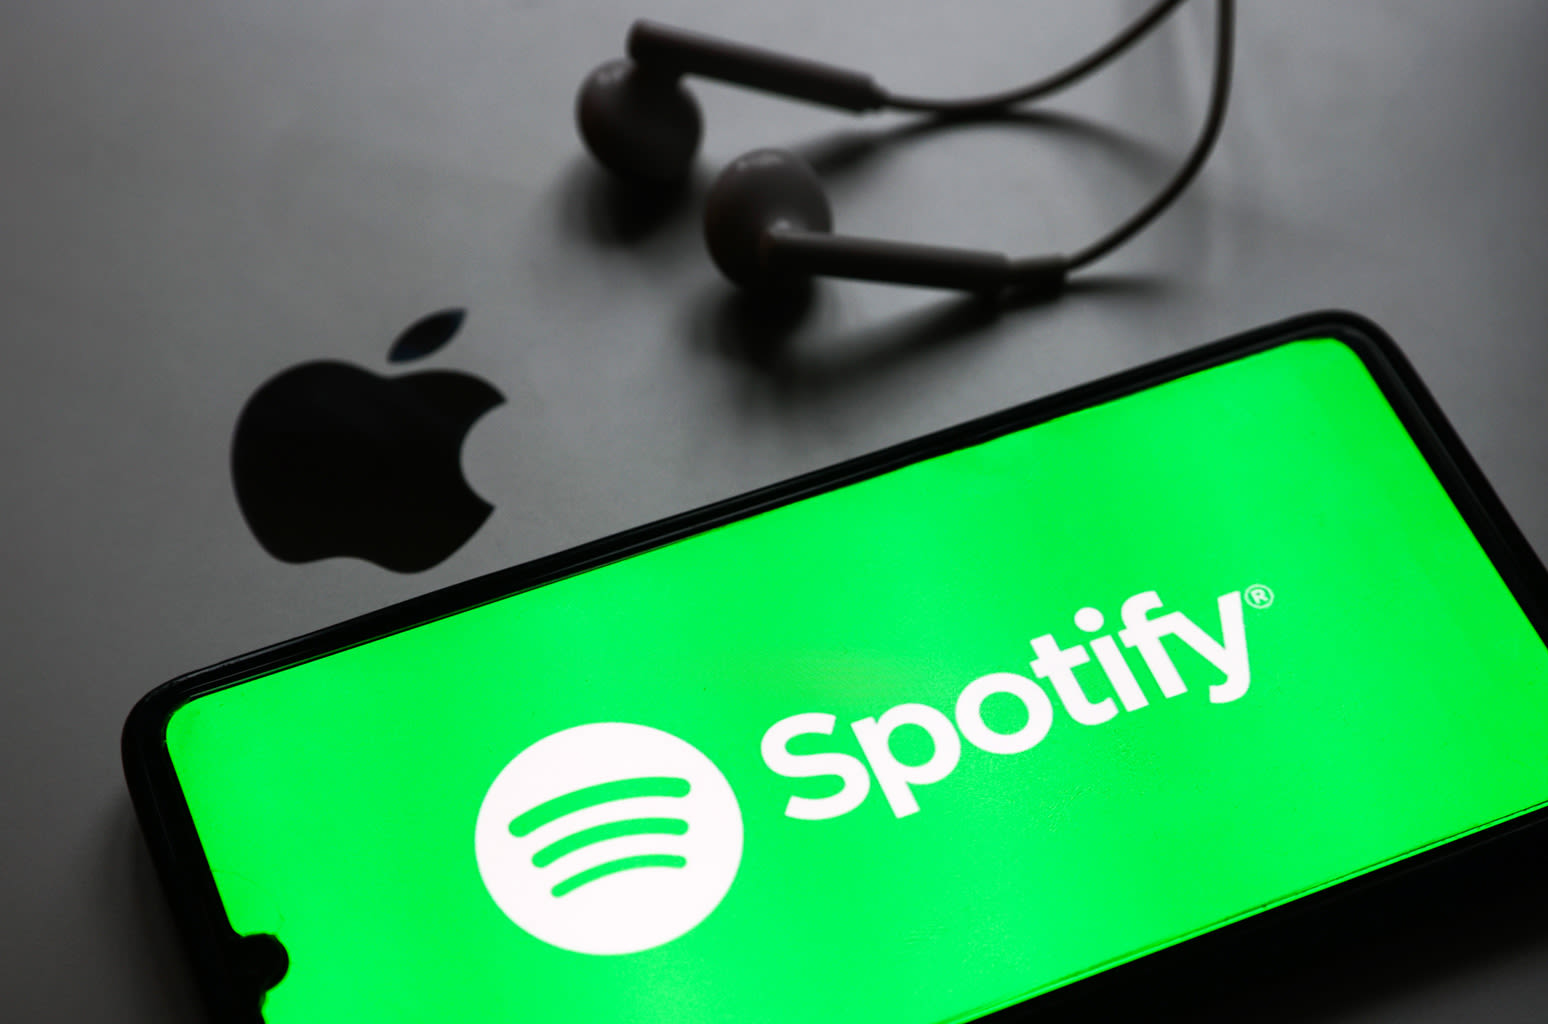 The MLC Sues Spotify for Bundling, Cutting Royalties for Publishers and Songwriters